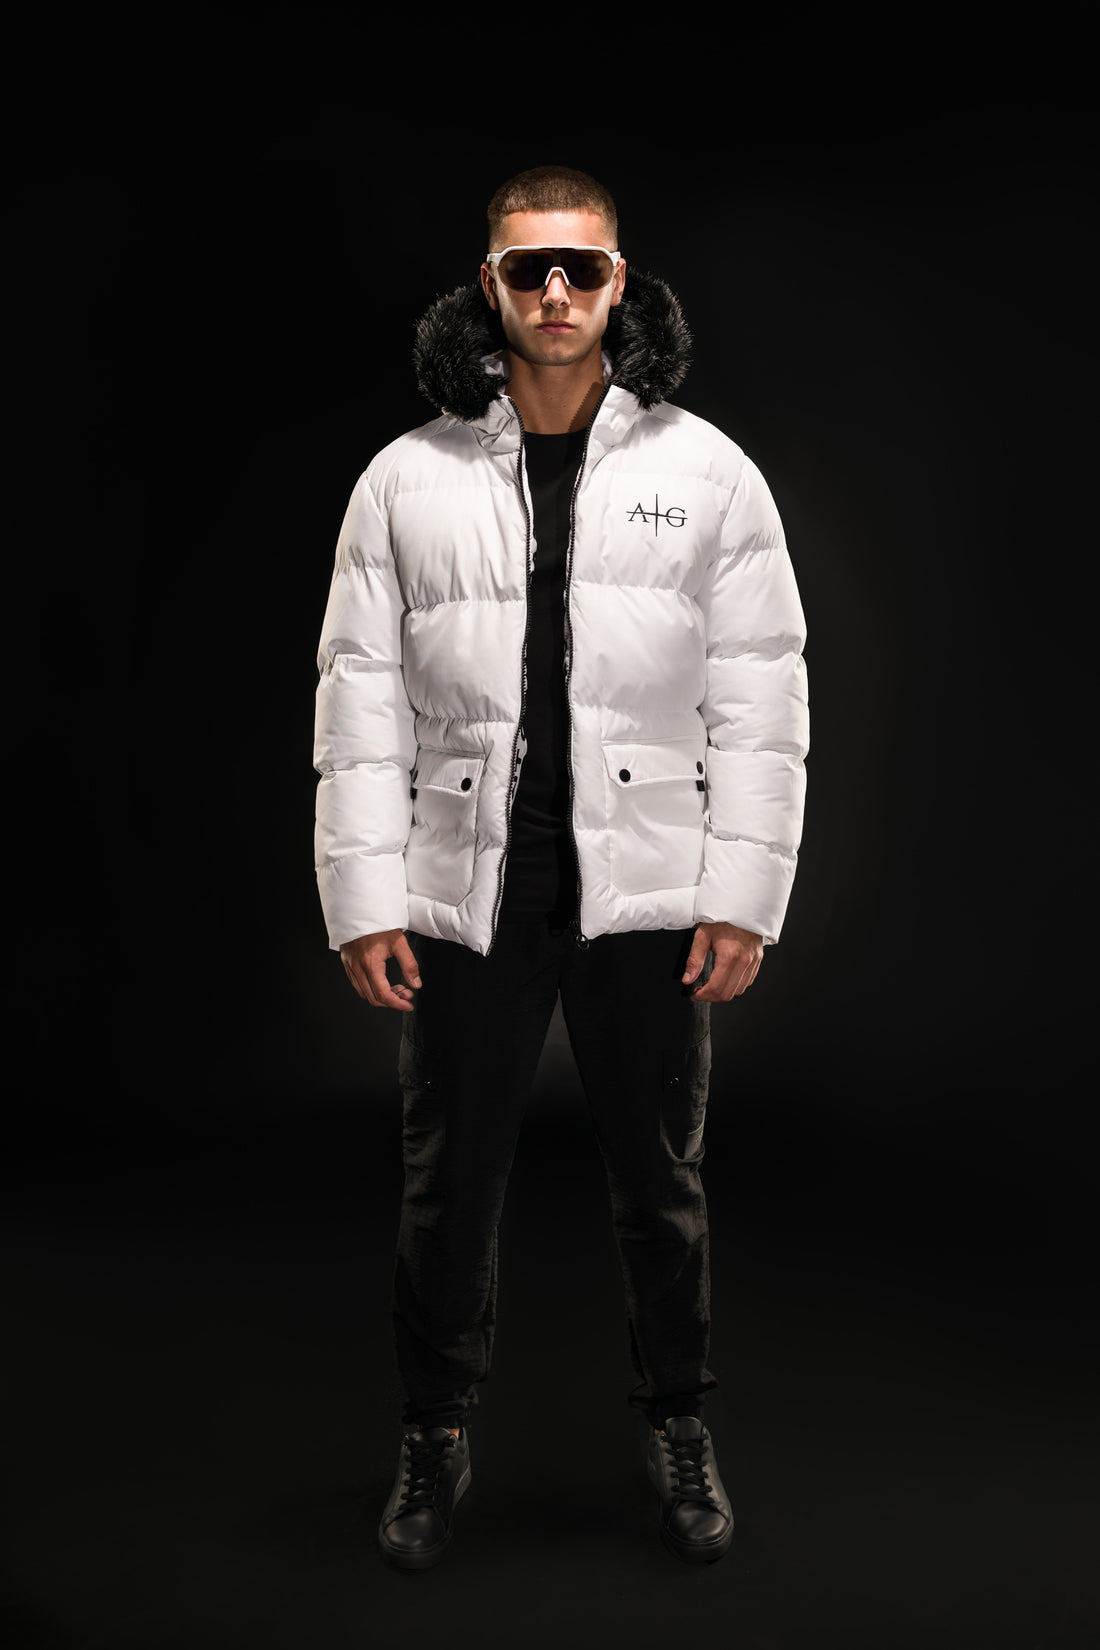 Monte Carlo Jacket in White